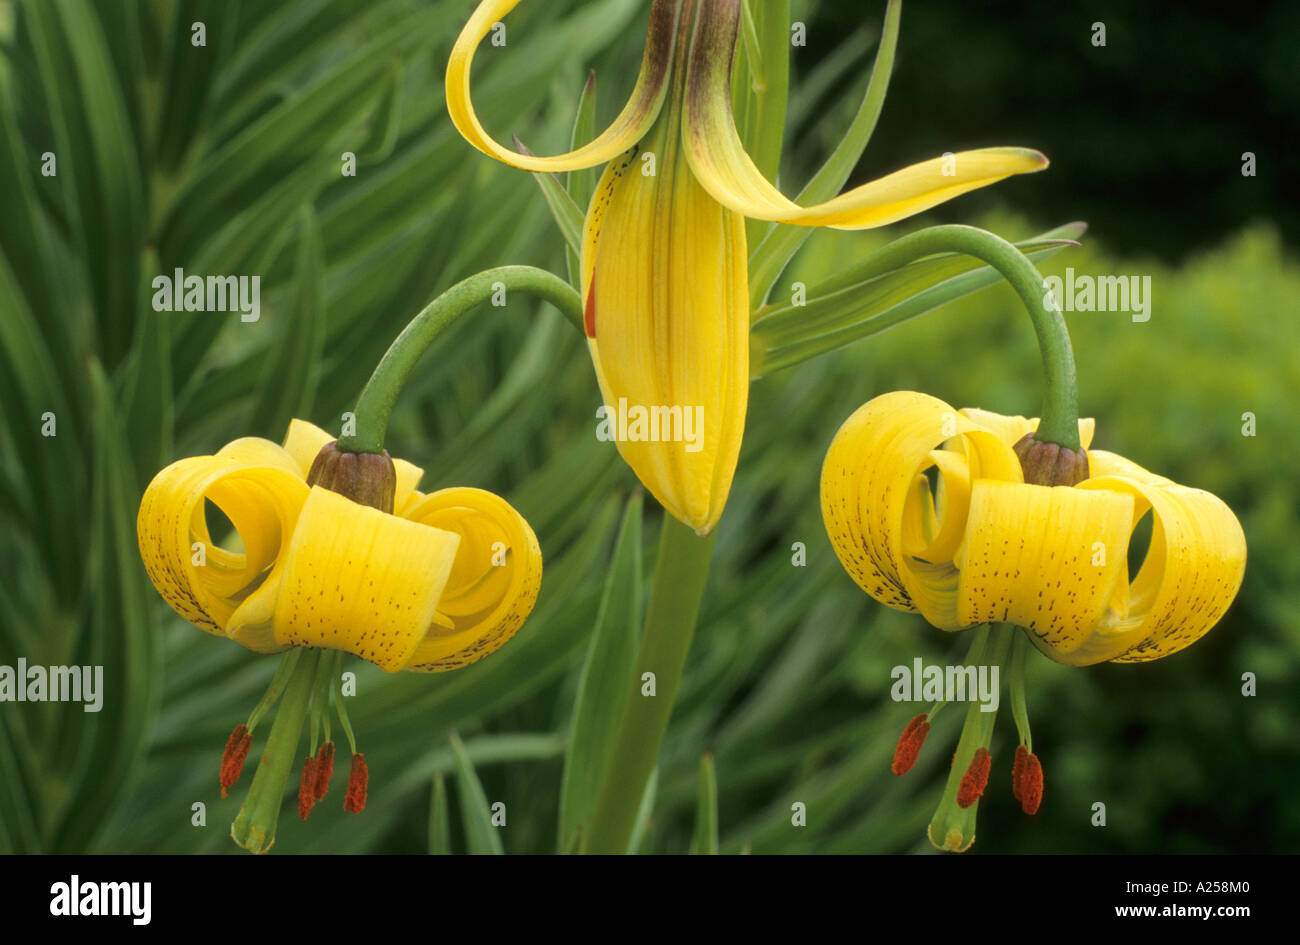 Lilium 'Amber Gold', yellow flower lily, nodding turkscap, garden plant, horticulture, fragrant lillies lilies Stock Photo